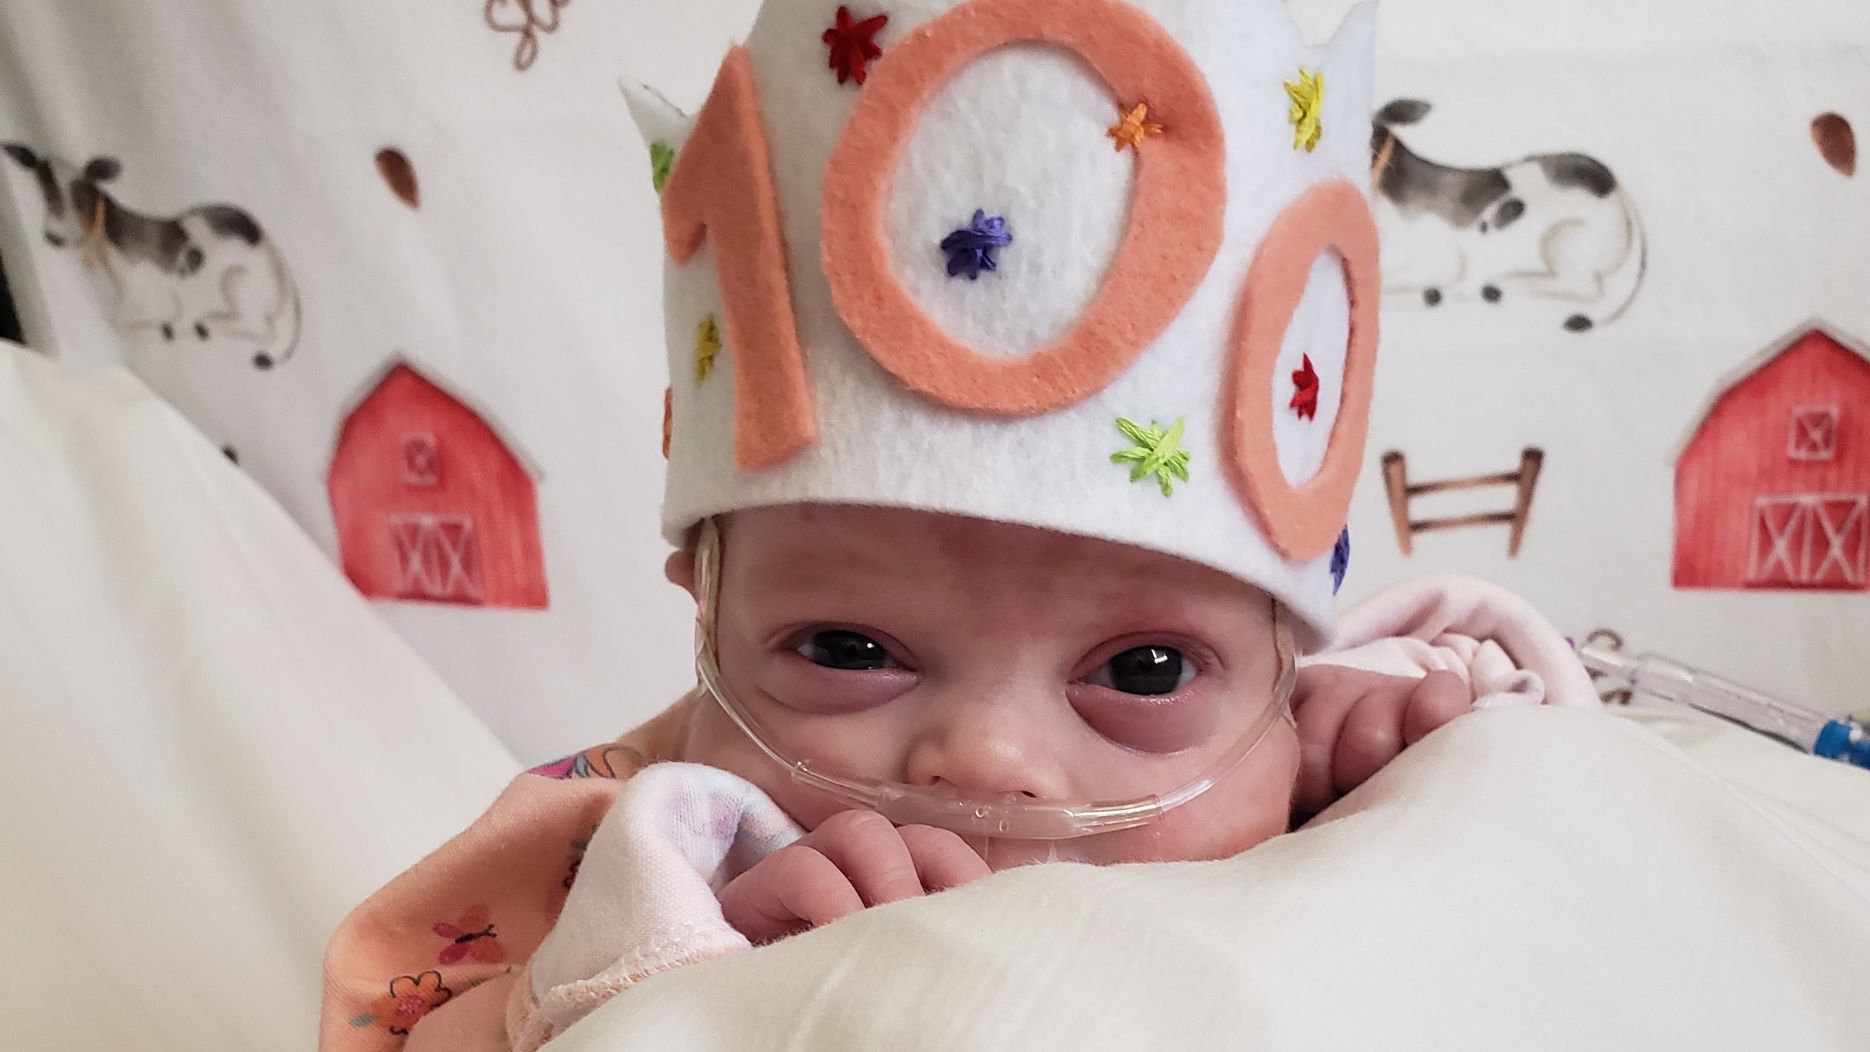 renown nicu patient celebrates her 100 days of life with a crown made by staff